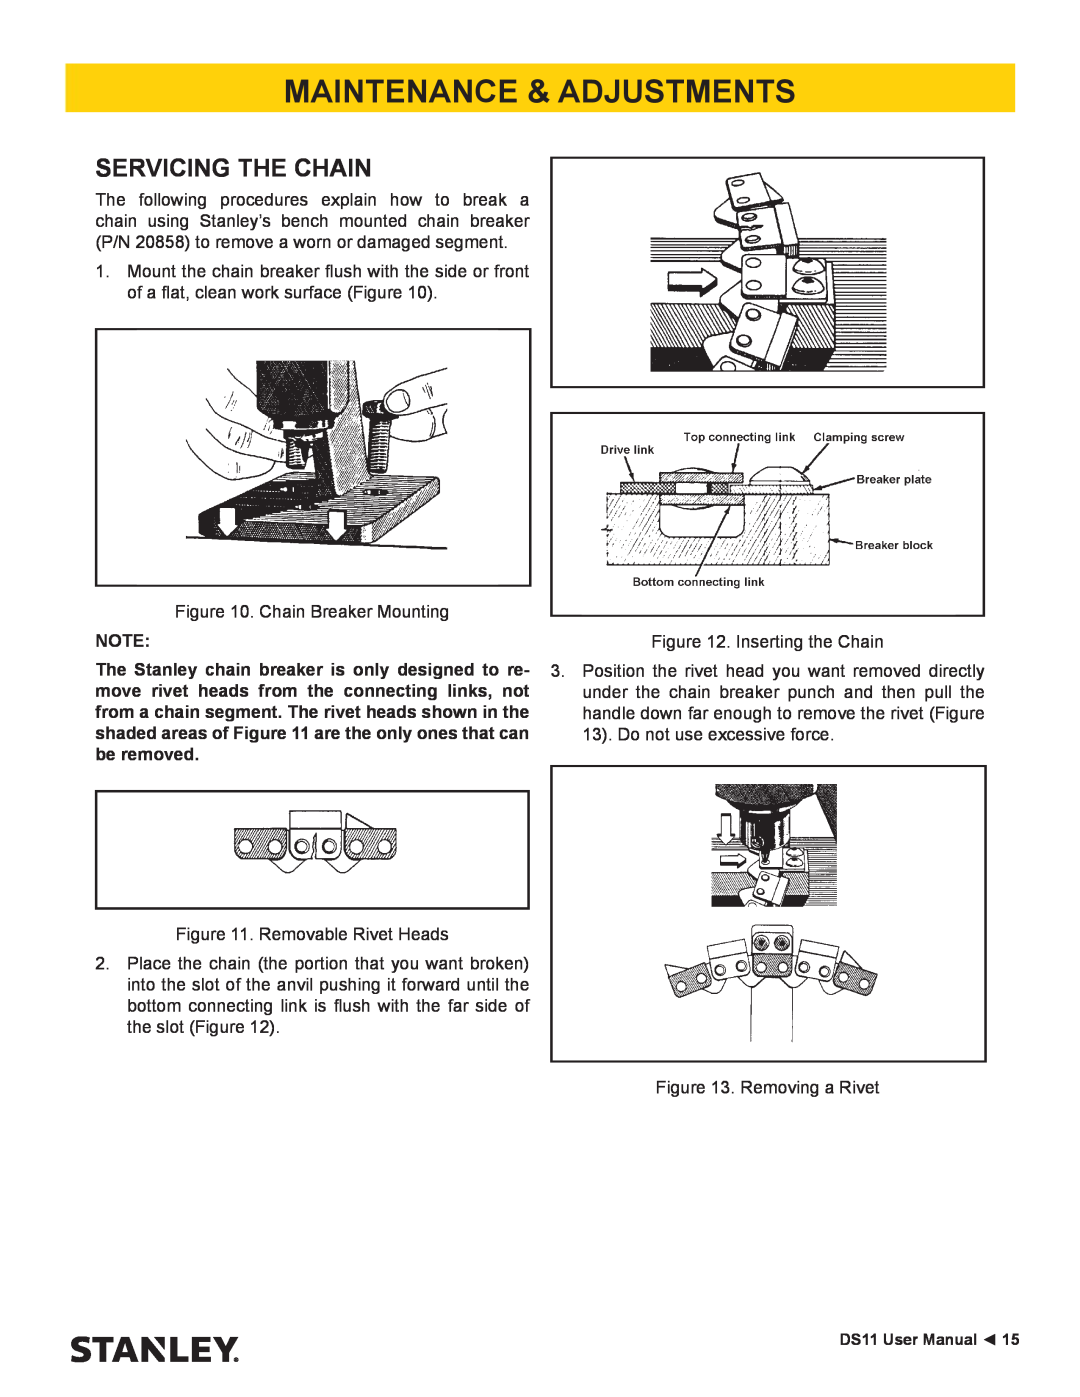 Stanley Black & Decker DS11 user manual Servicing The Chain, Maintenance & Adjustments 